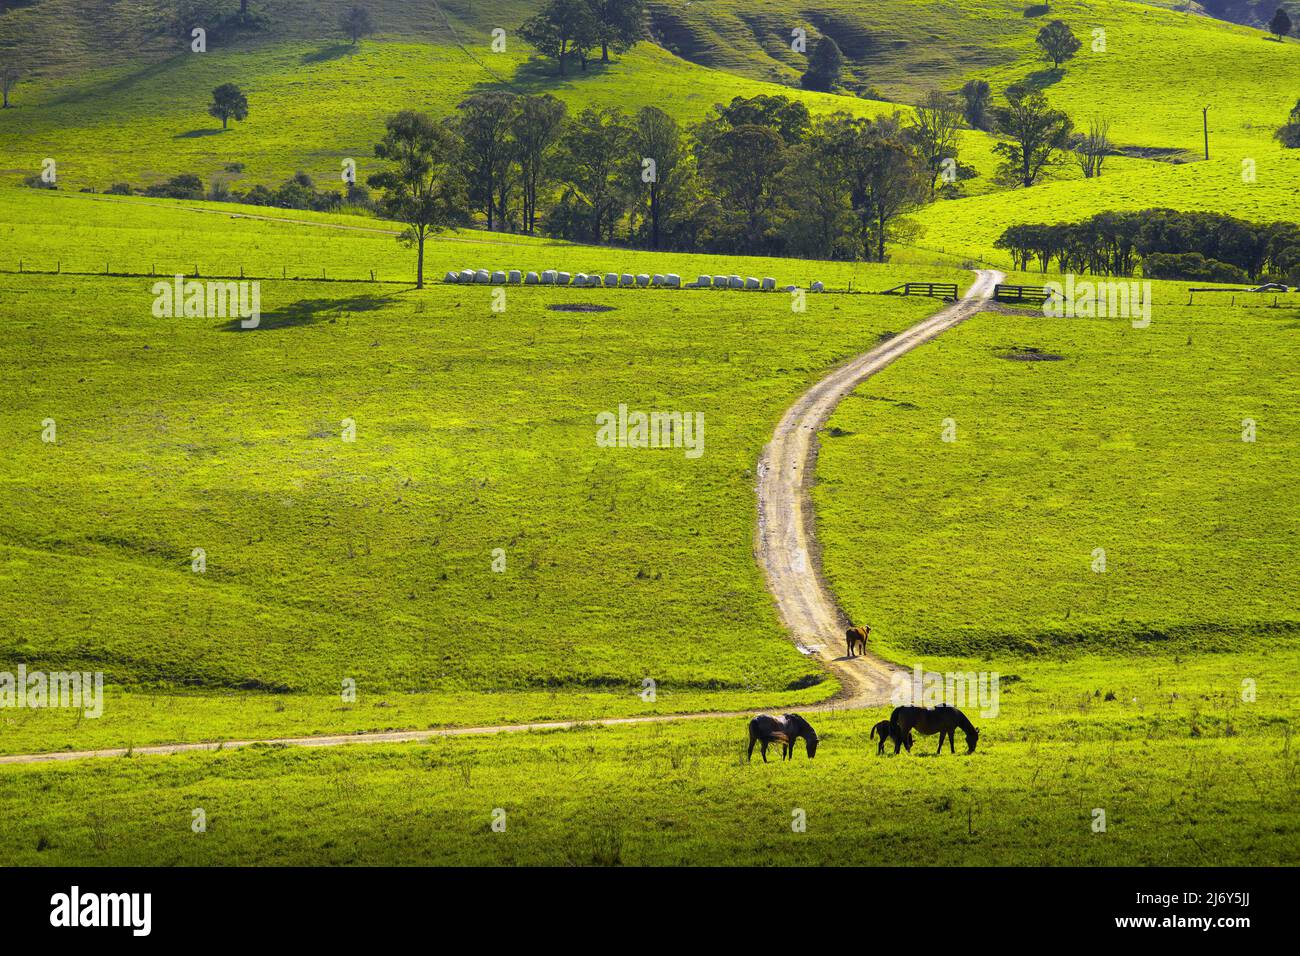 Rural scene with unsealed road and horses grazing in foreground with hills rising beyond. Stock Photo